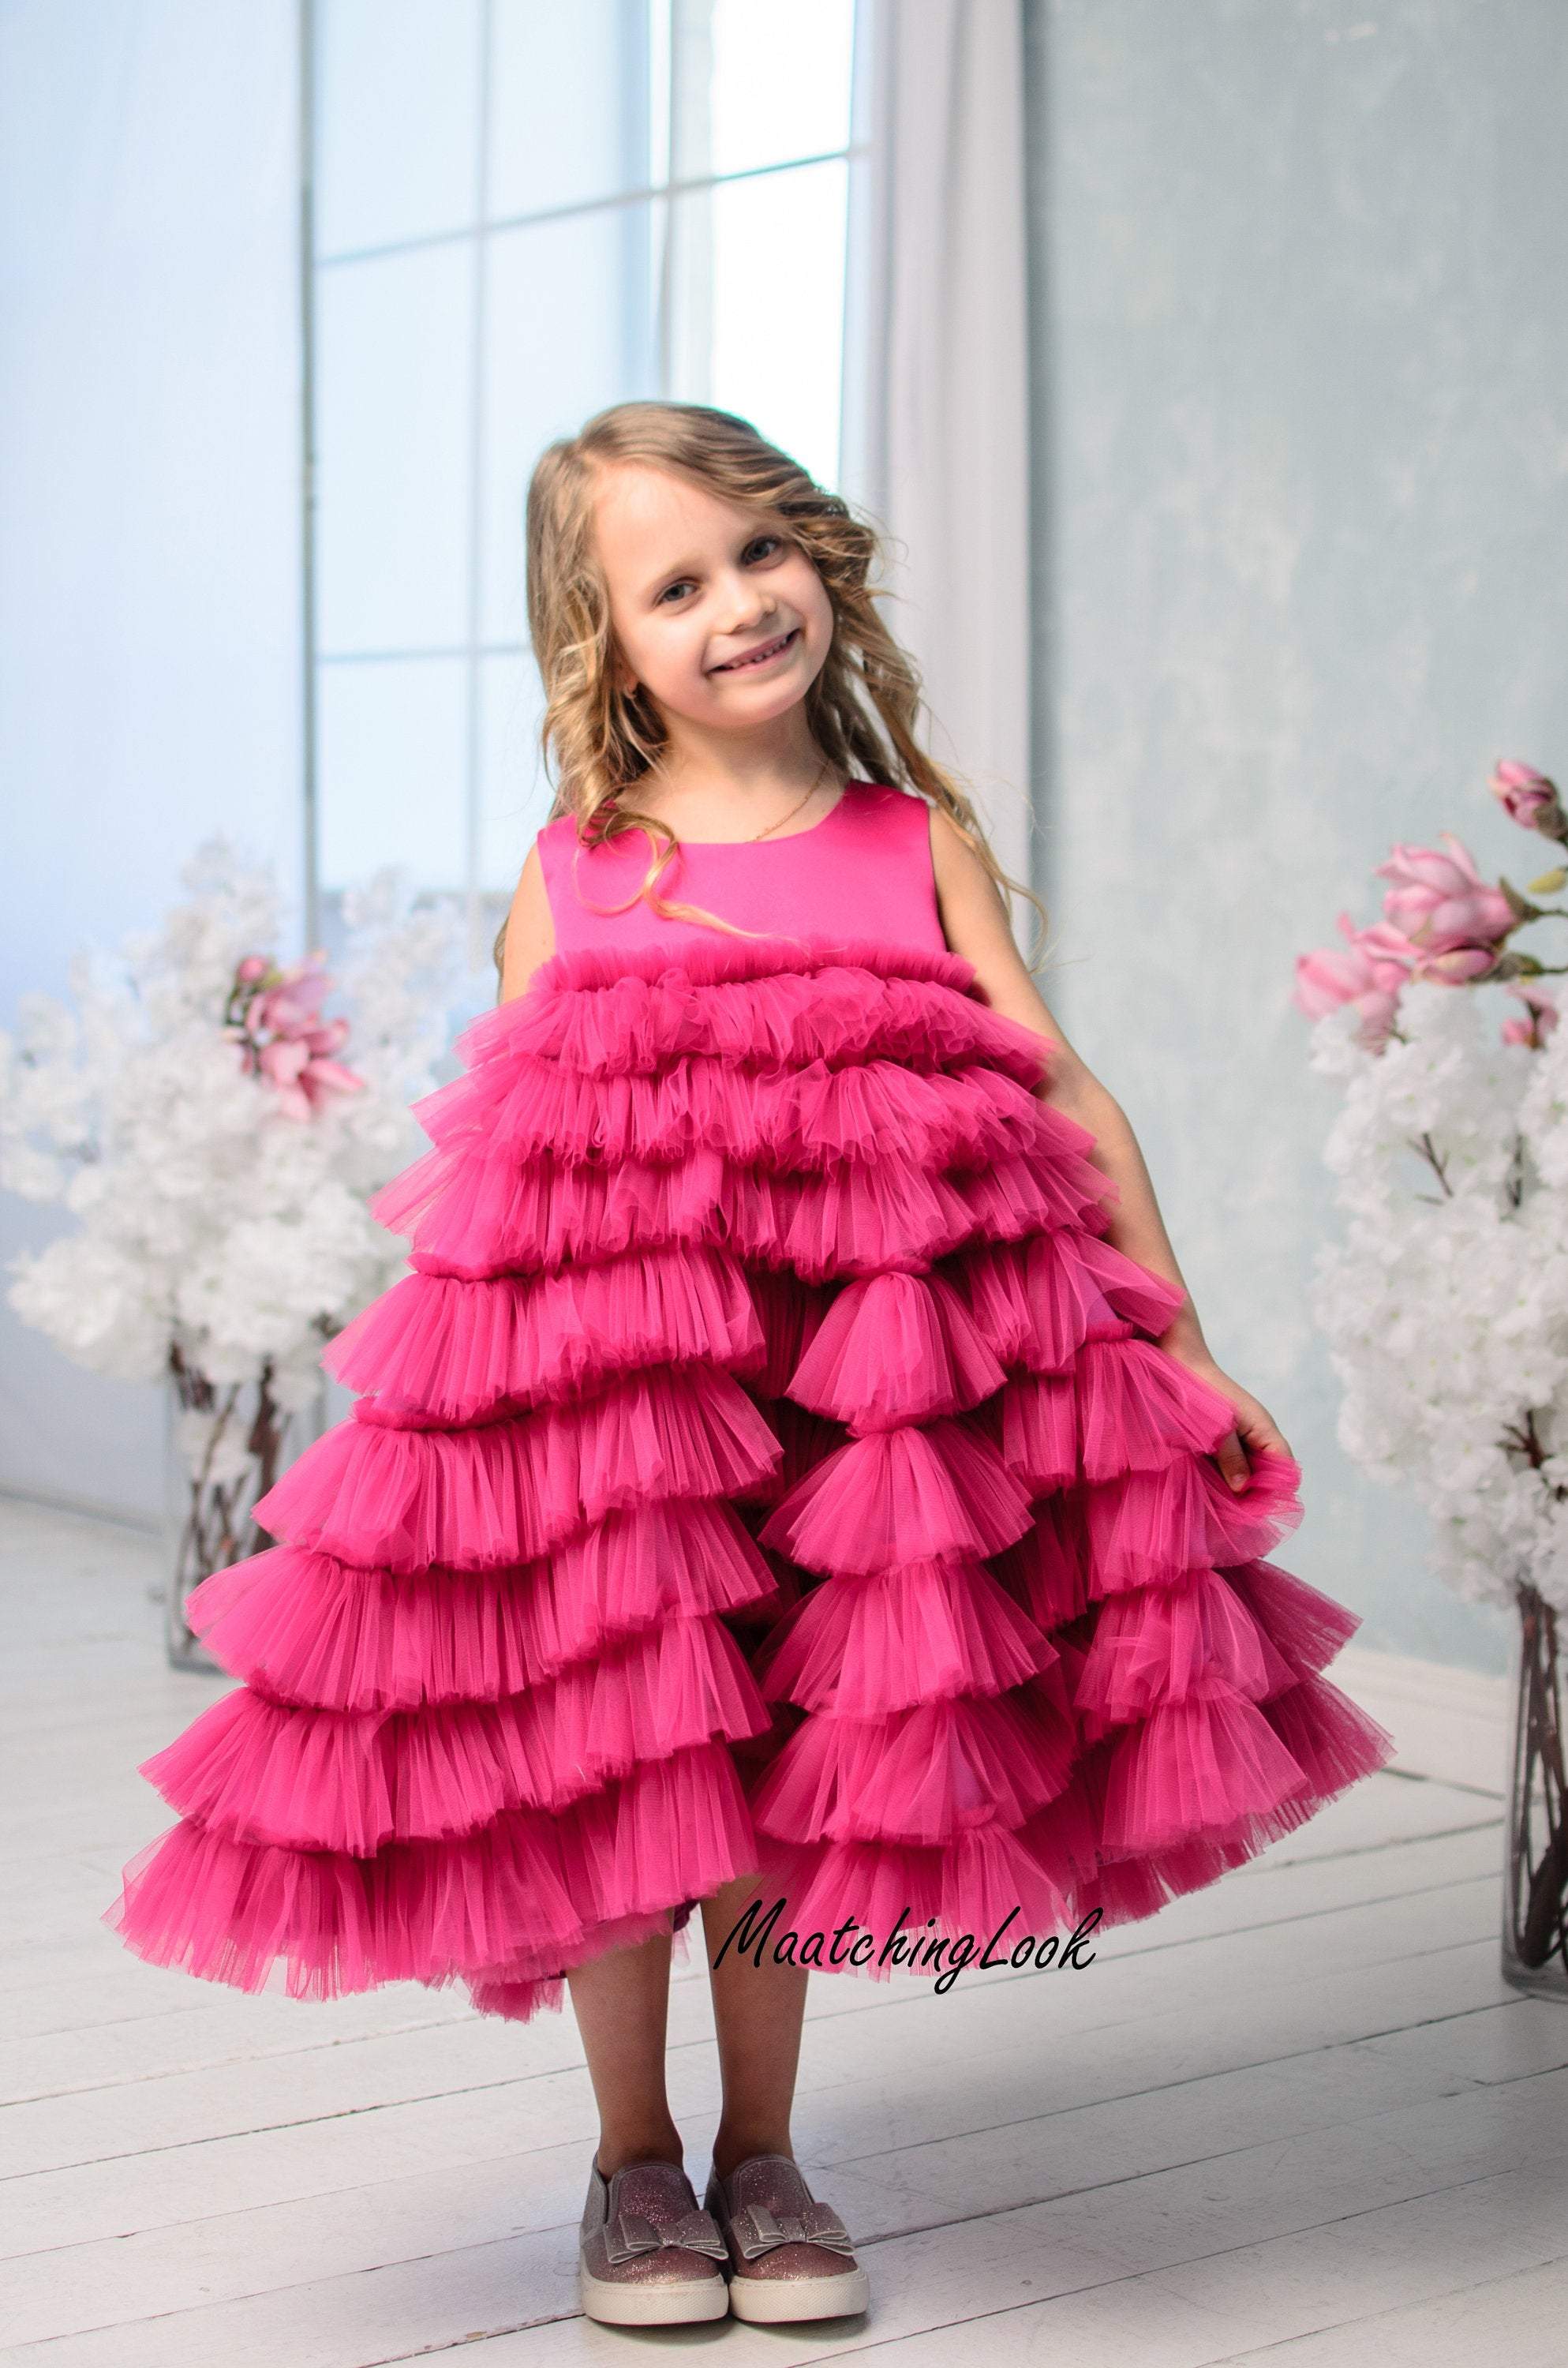 Trending Baby girl party wear dress collections / Baby dresses designs -  YouTube